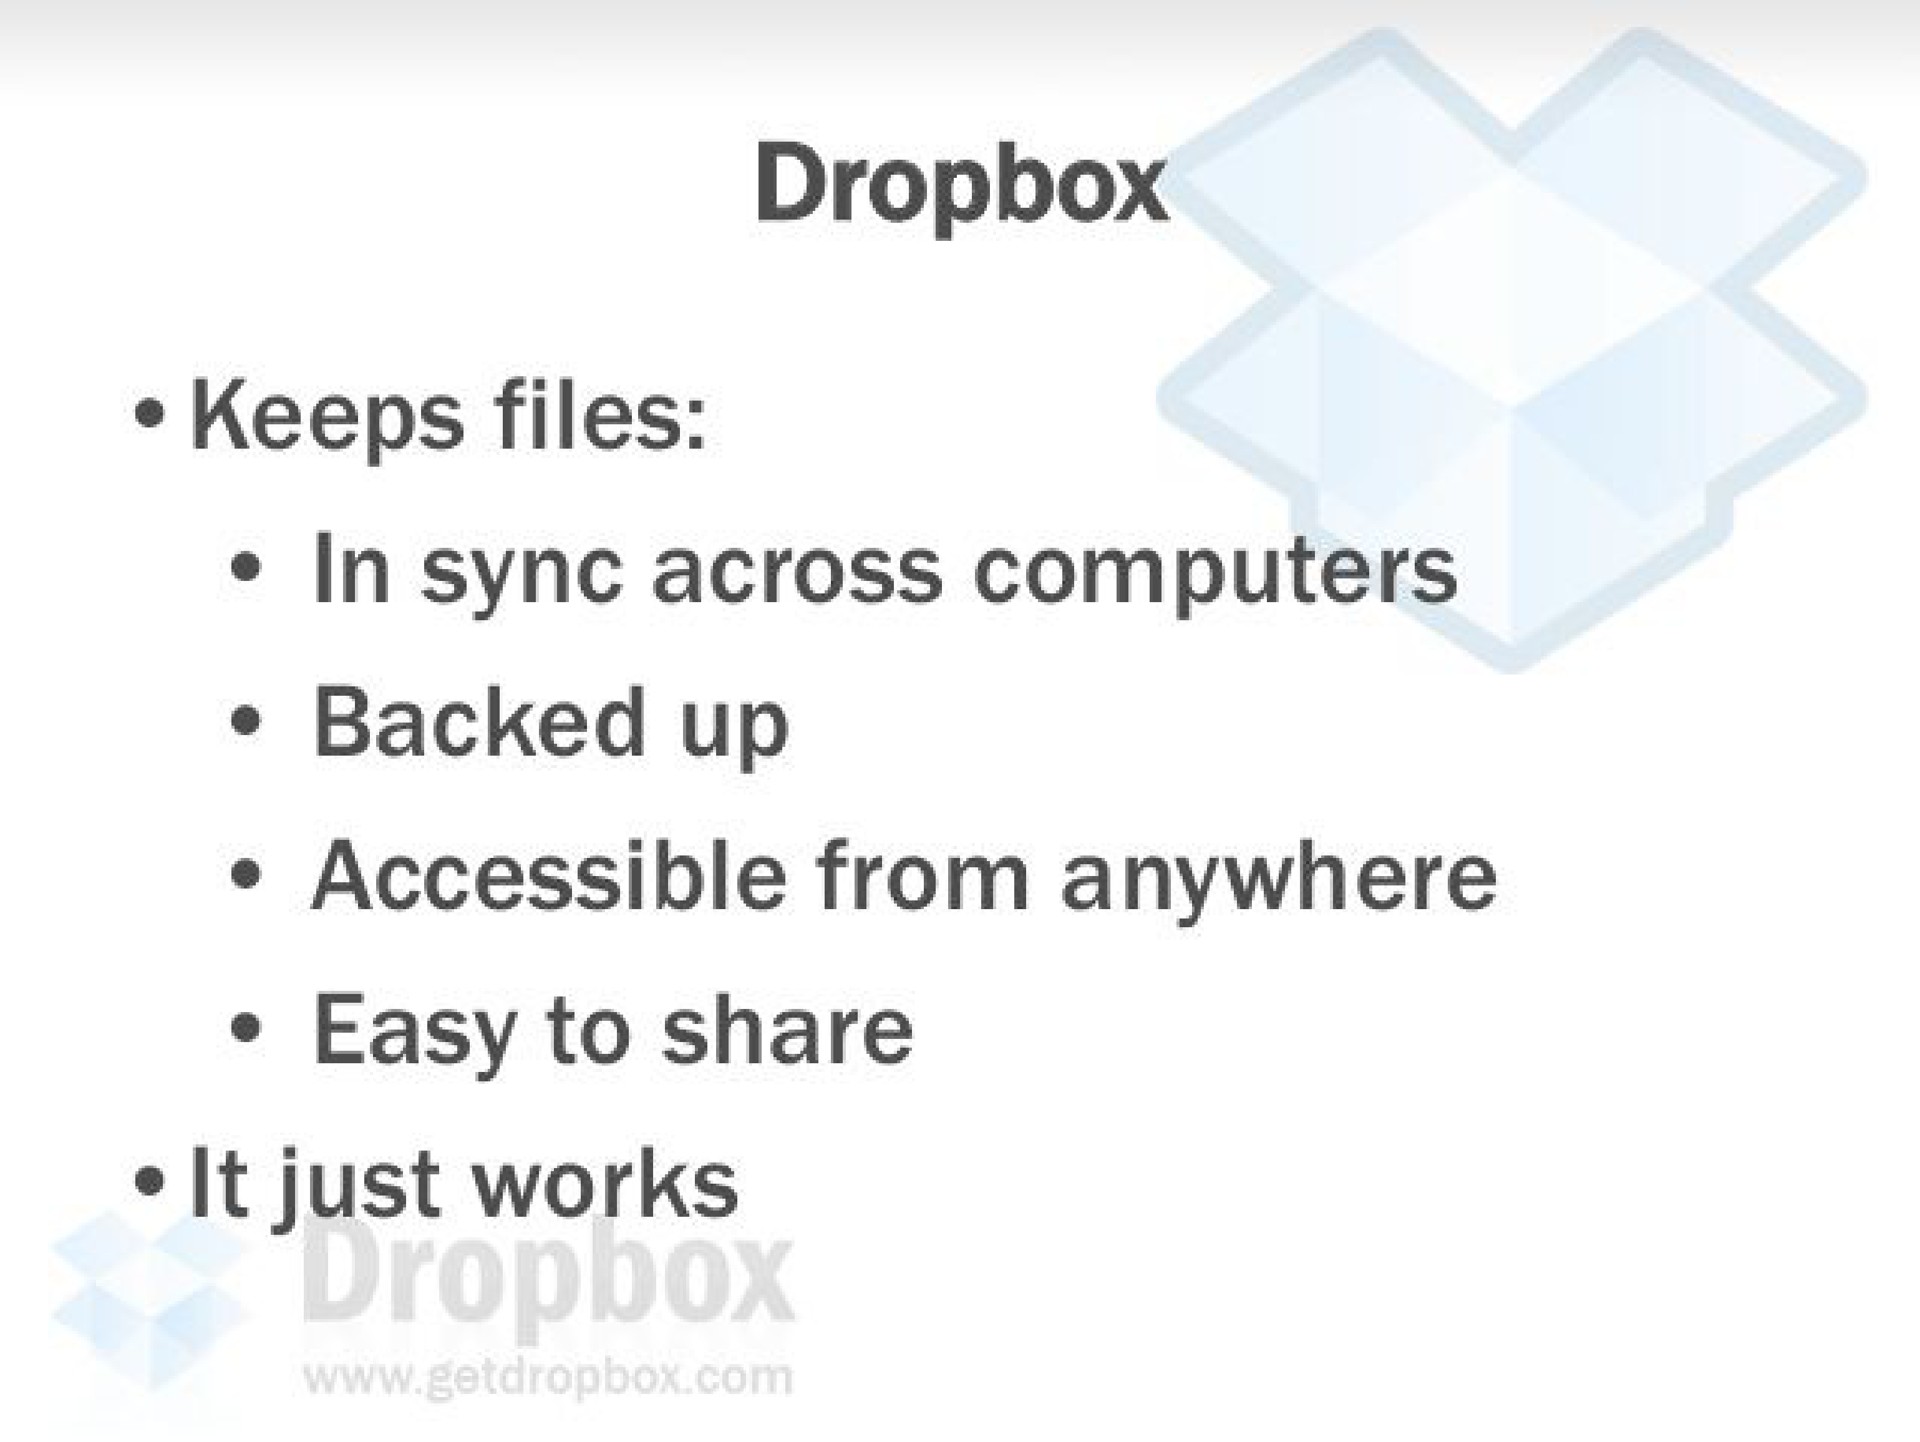 keeps files in syne across computers backed up accessible from anywhere easy to share elt just works | Dropbox